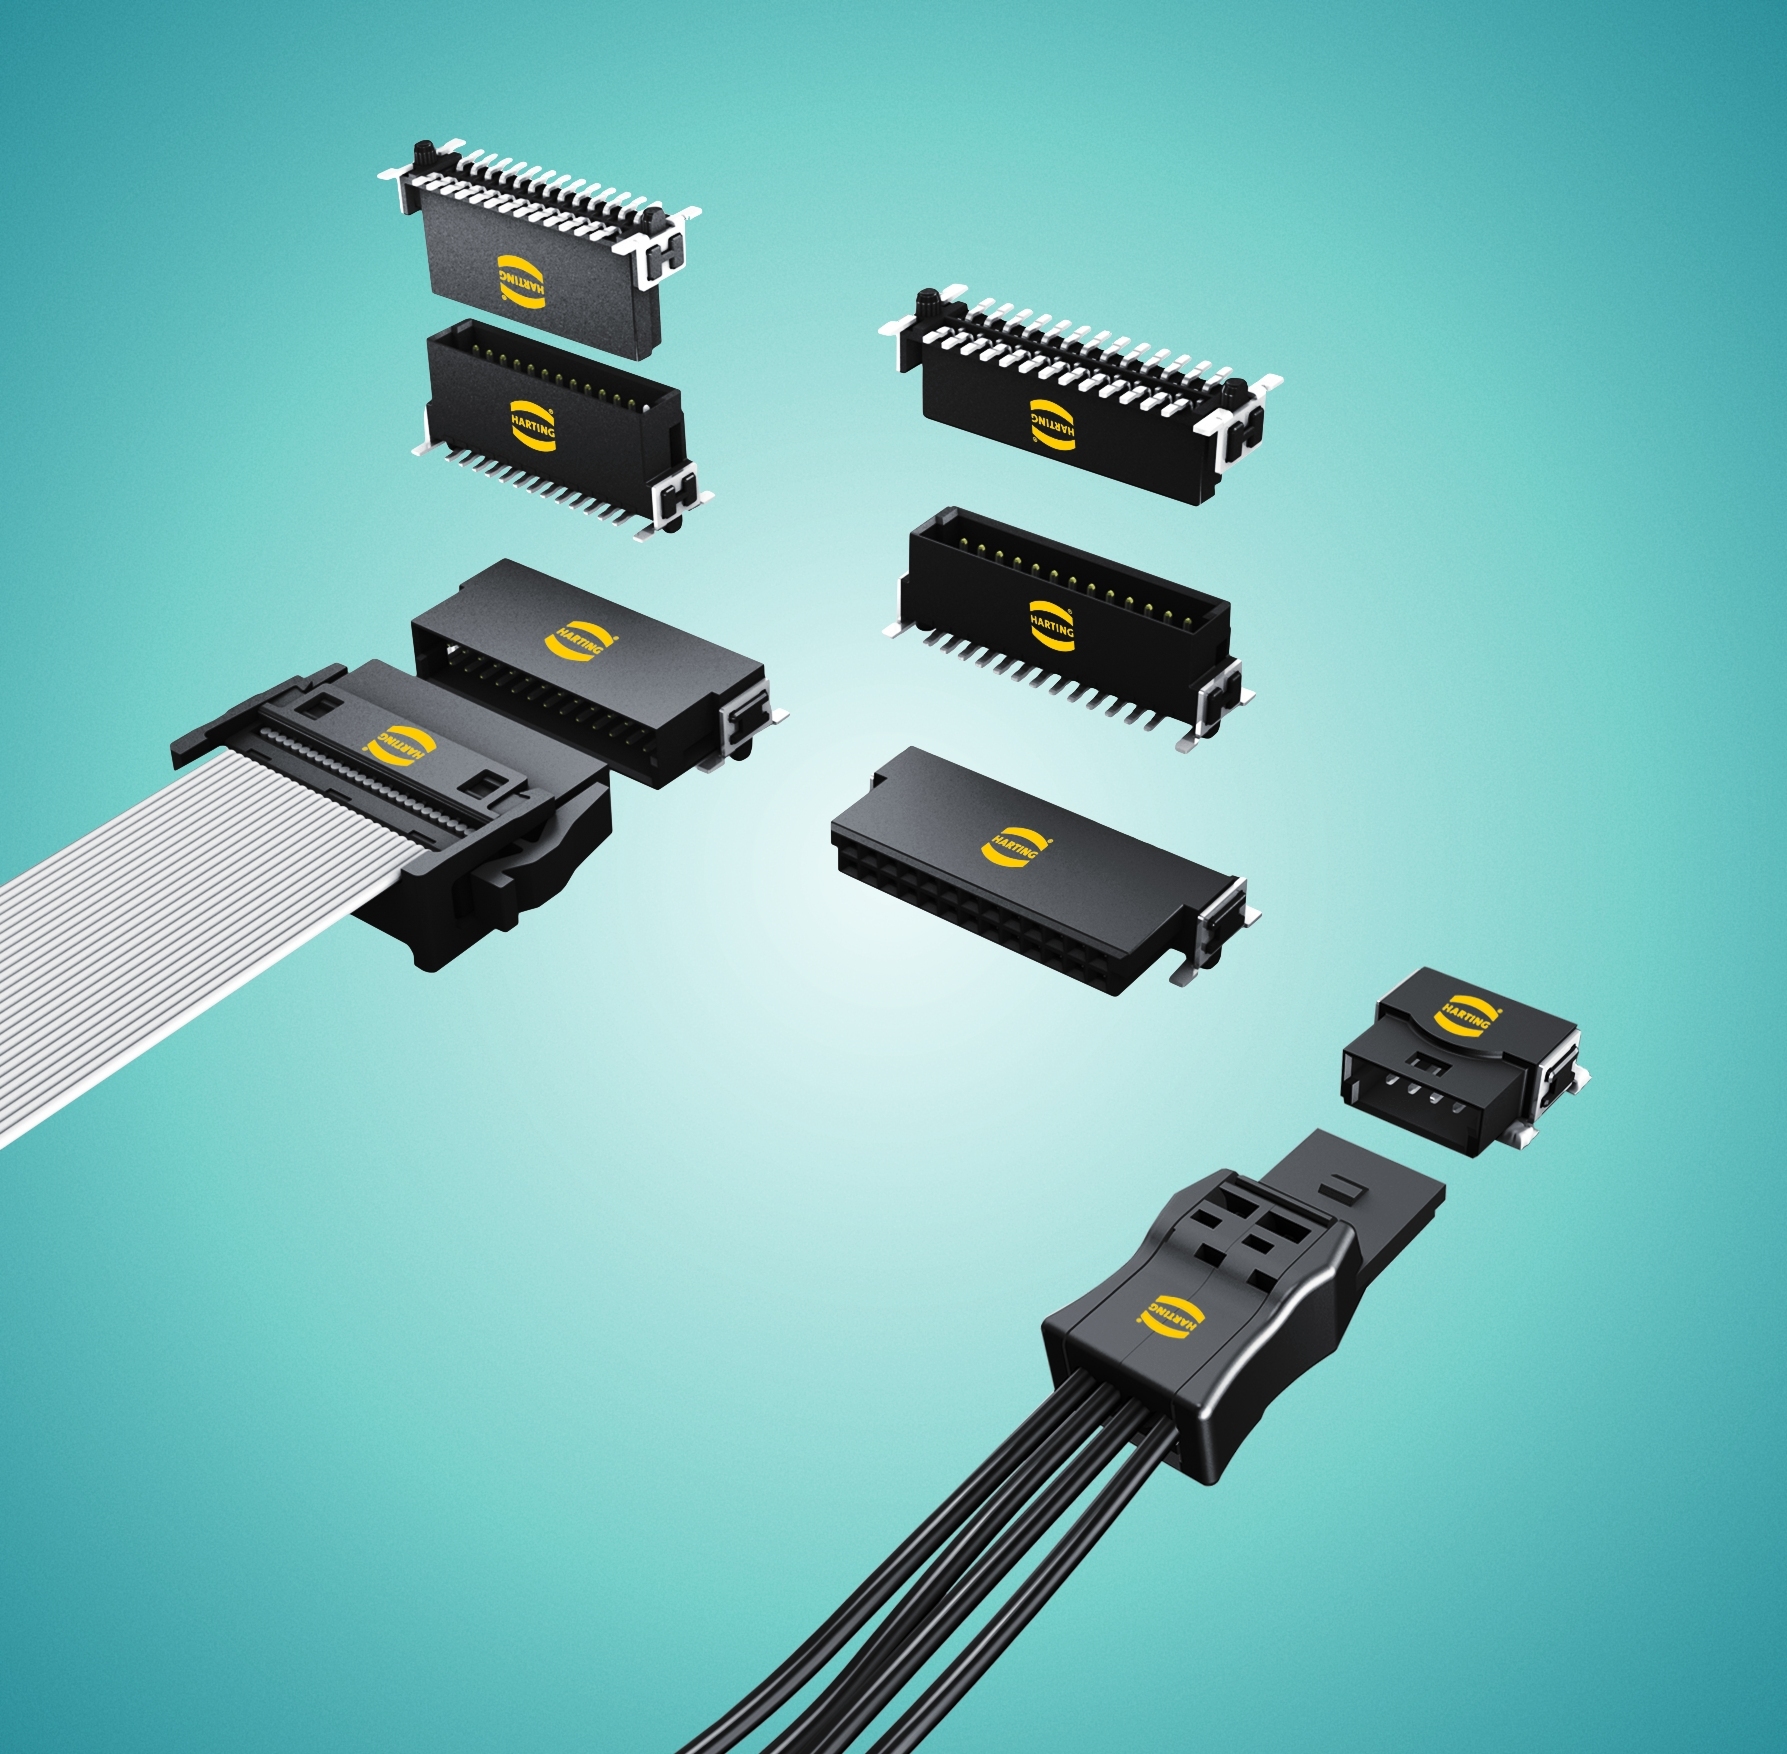 Figure 4: Harting’s har-flex and har-flexicon ranges together offer a complete connectivity solution for device-to-board and board-to-board applications 